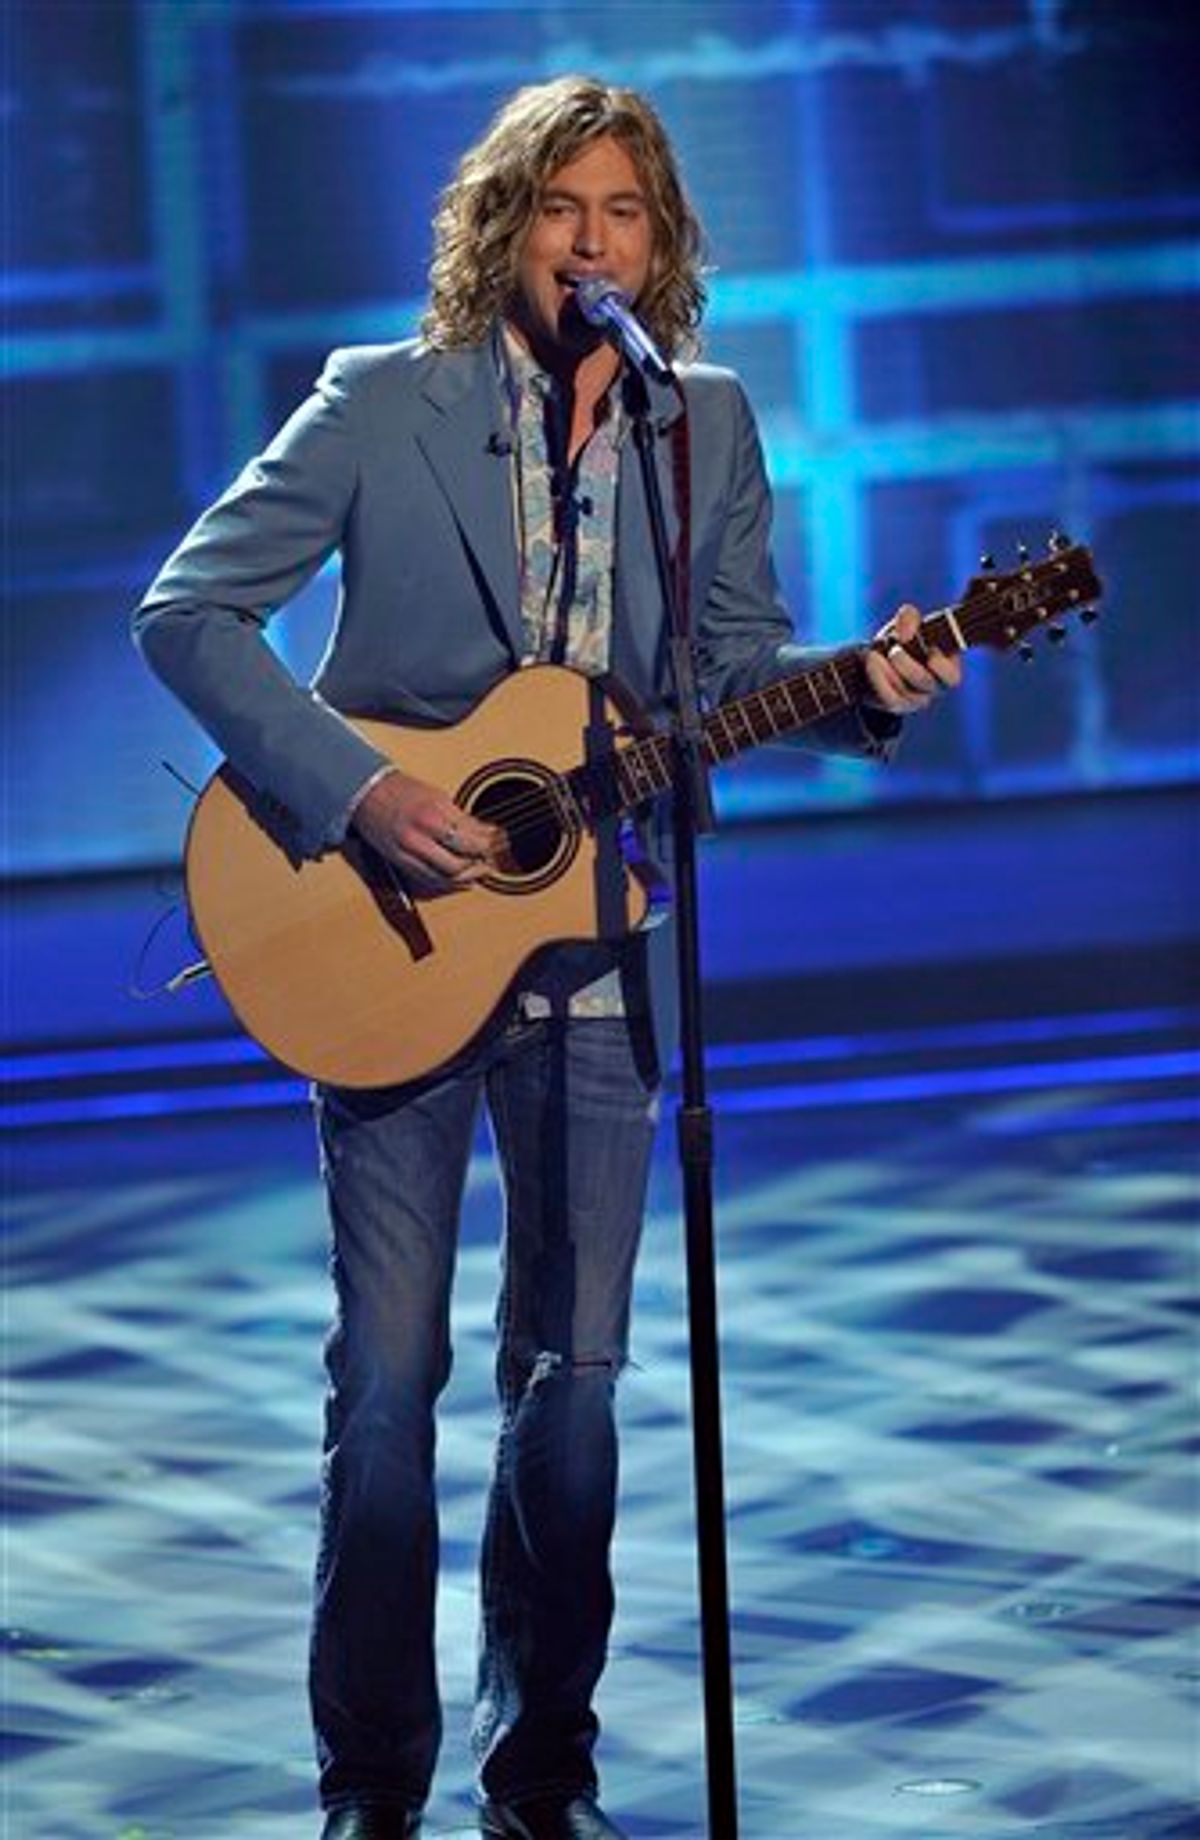 In this publicity image released by Fox, contestant Casey James performs on the singing competition series, "American Idol," on Tuesday, May 18, 2010, in Los Angeles. (AP Photo/Fox, Michael Becker) (AP)